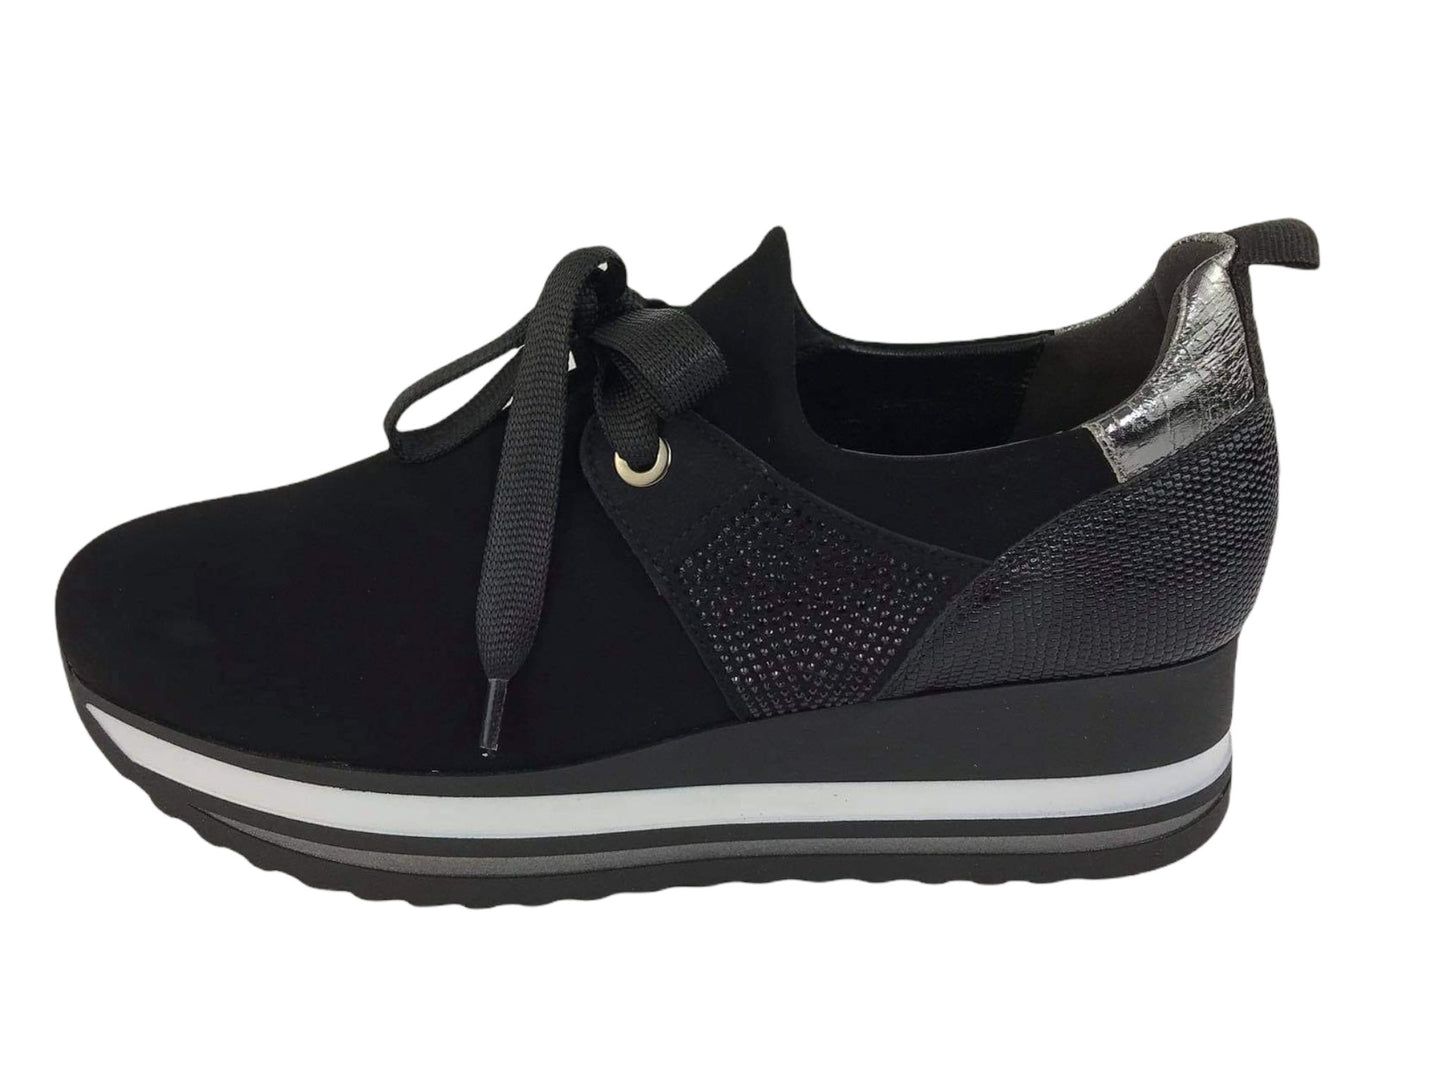 Commart | Women's black Nubuck sneakers with Milano bow